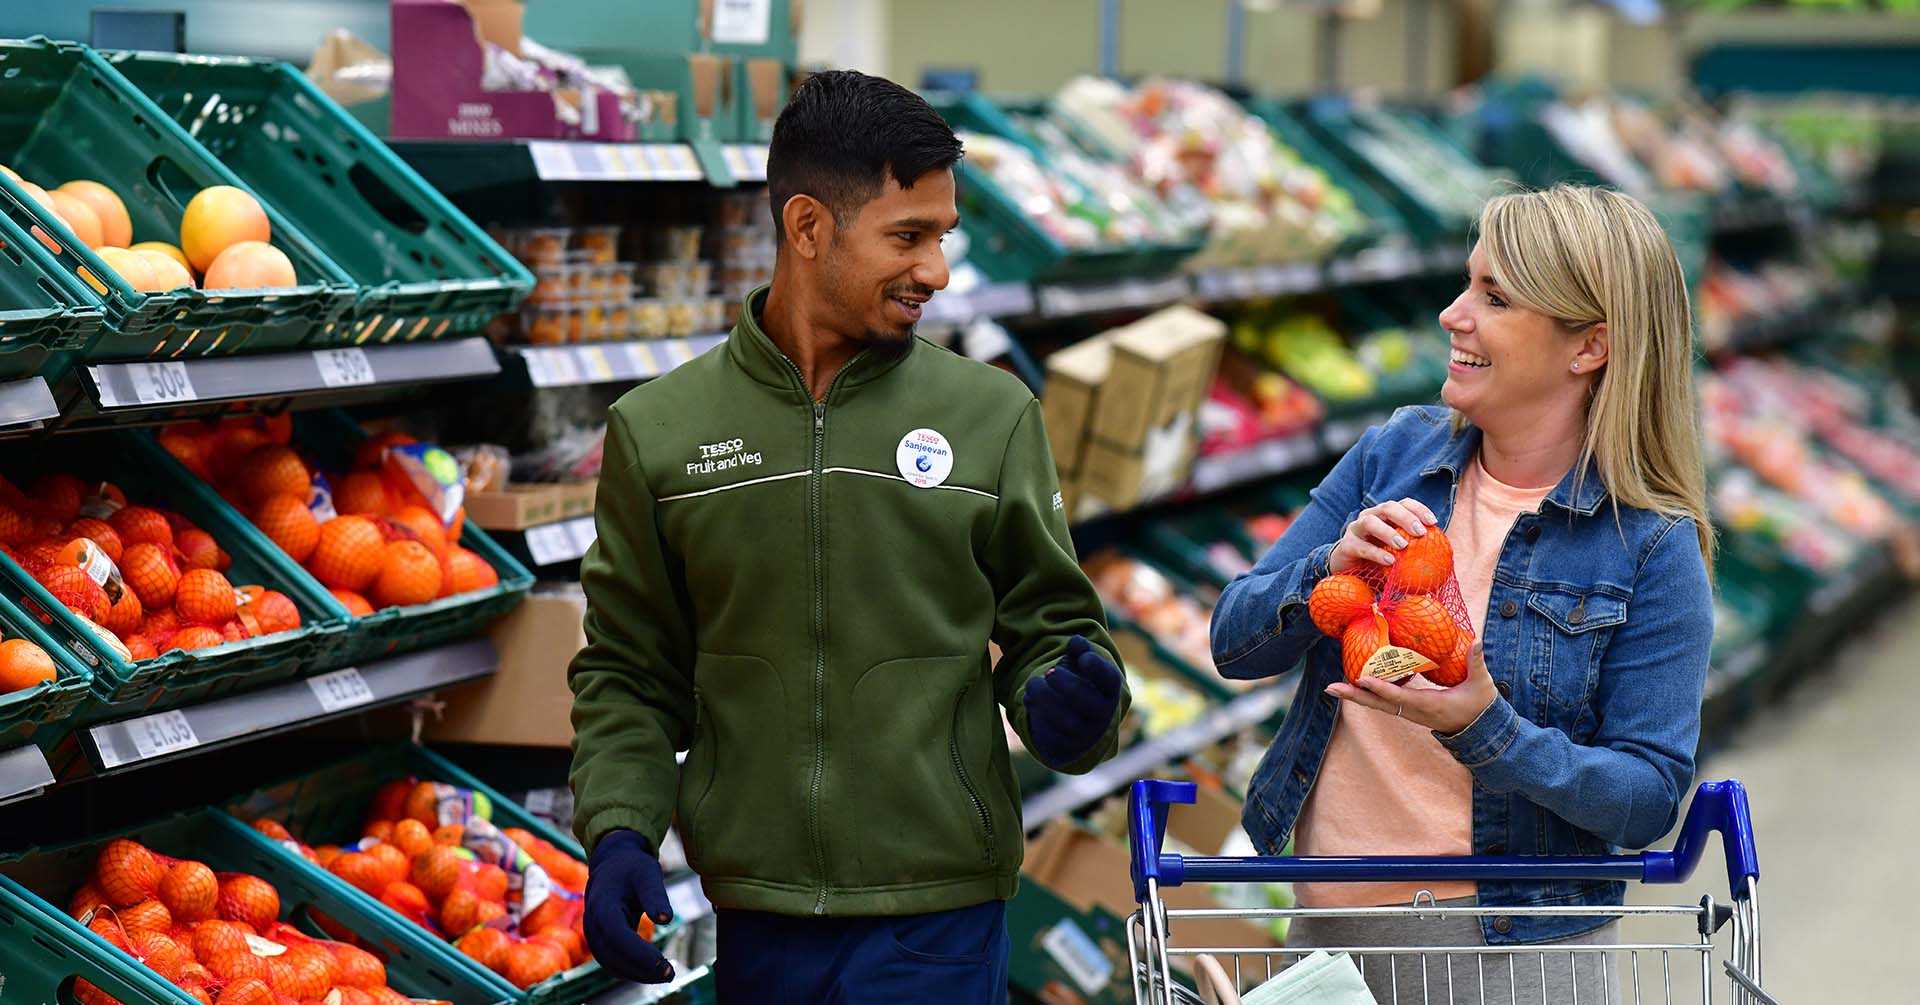 Tesco colleague chatting to a customer in store